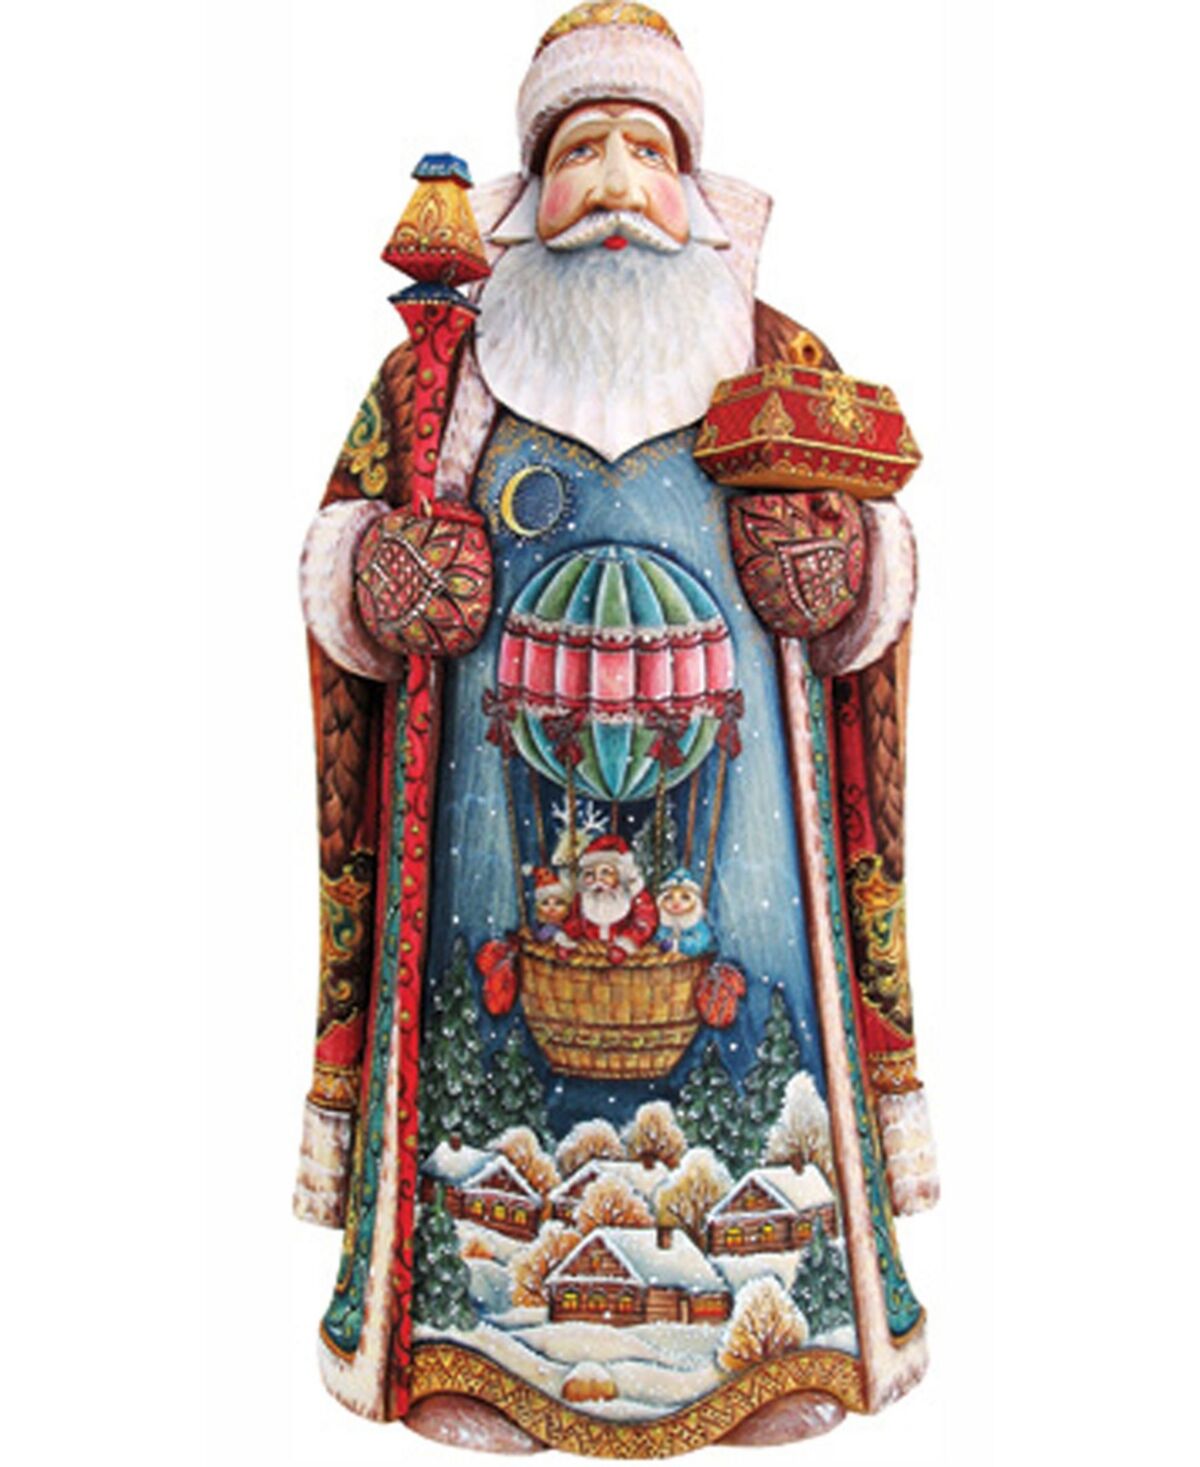 G.DeBrekht Woodcarved and Hand Painted Balloon Ride Santa Figurine - Multi